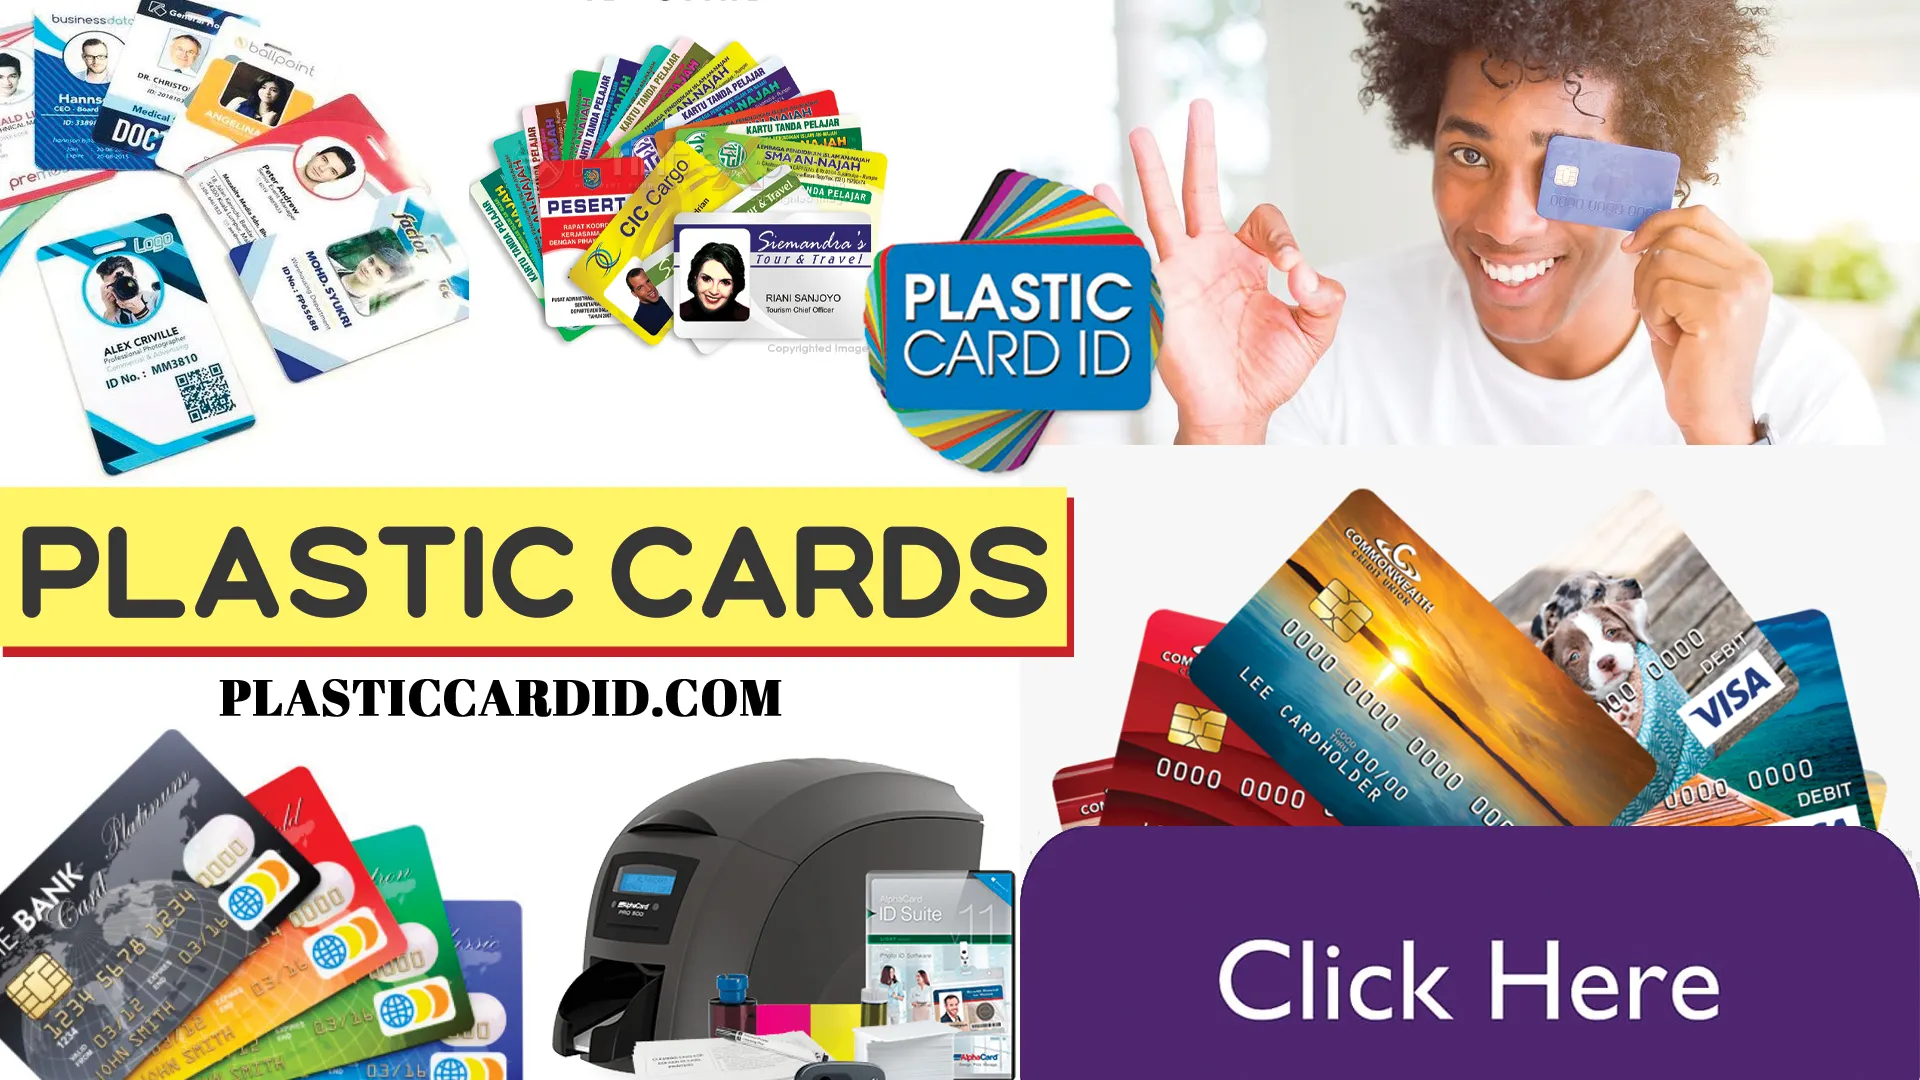 Welcome to the Future of Secure Personal Identification with Plastic Card ID




